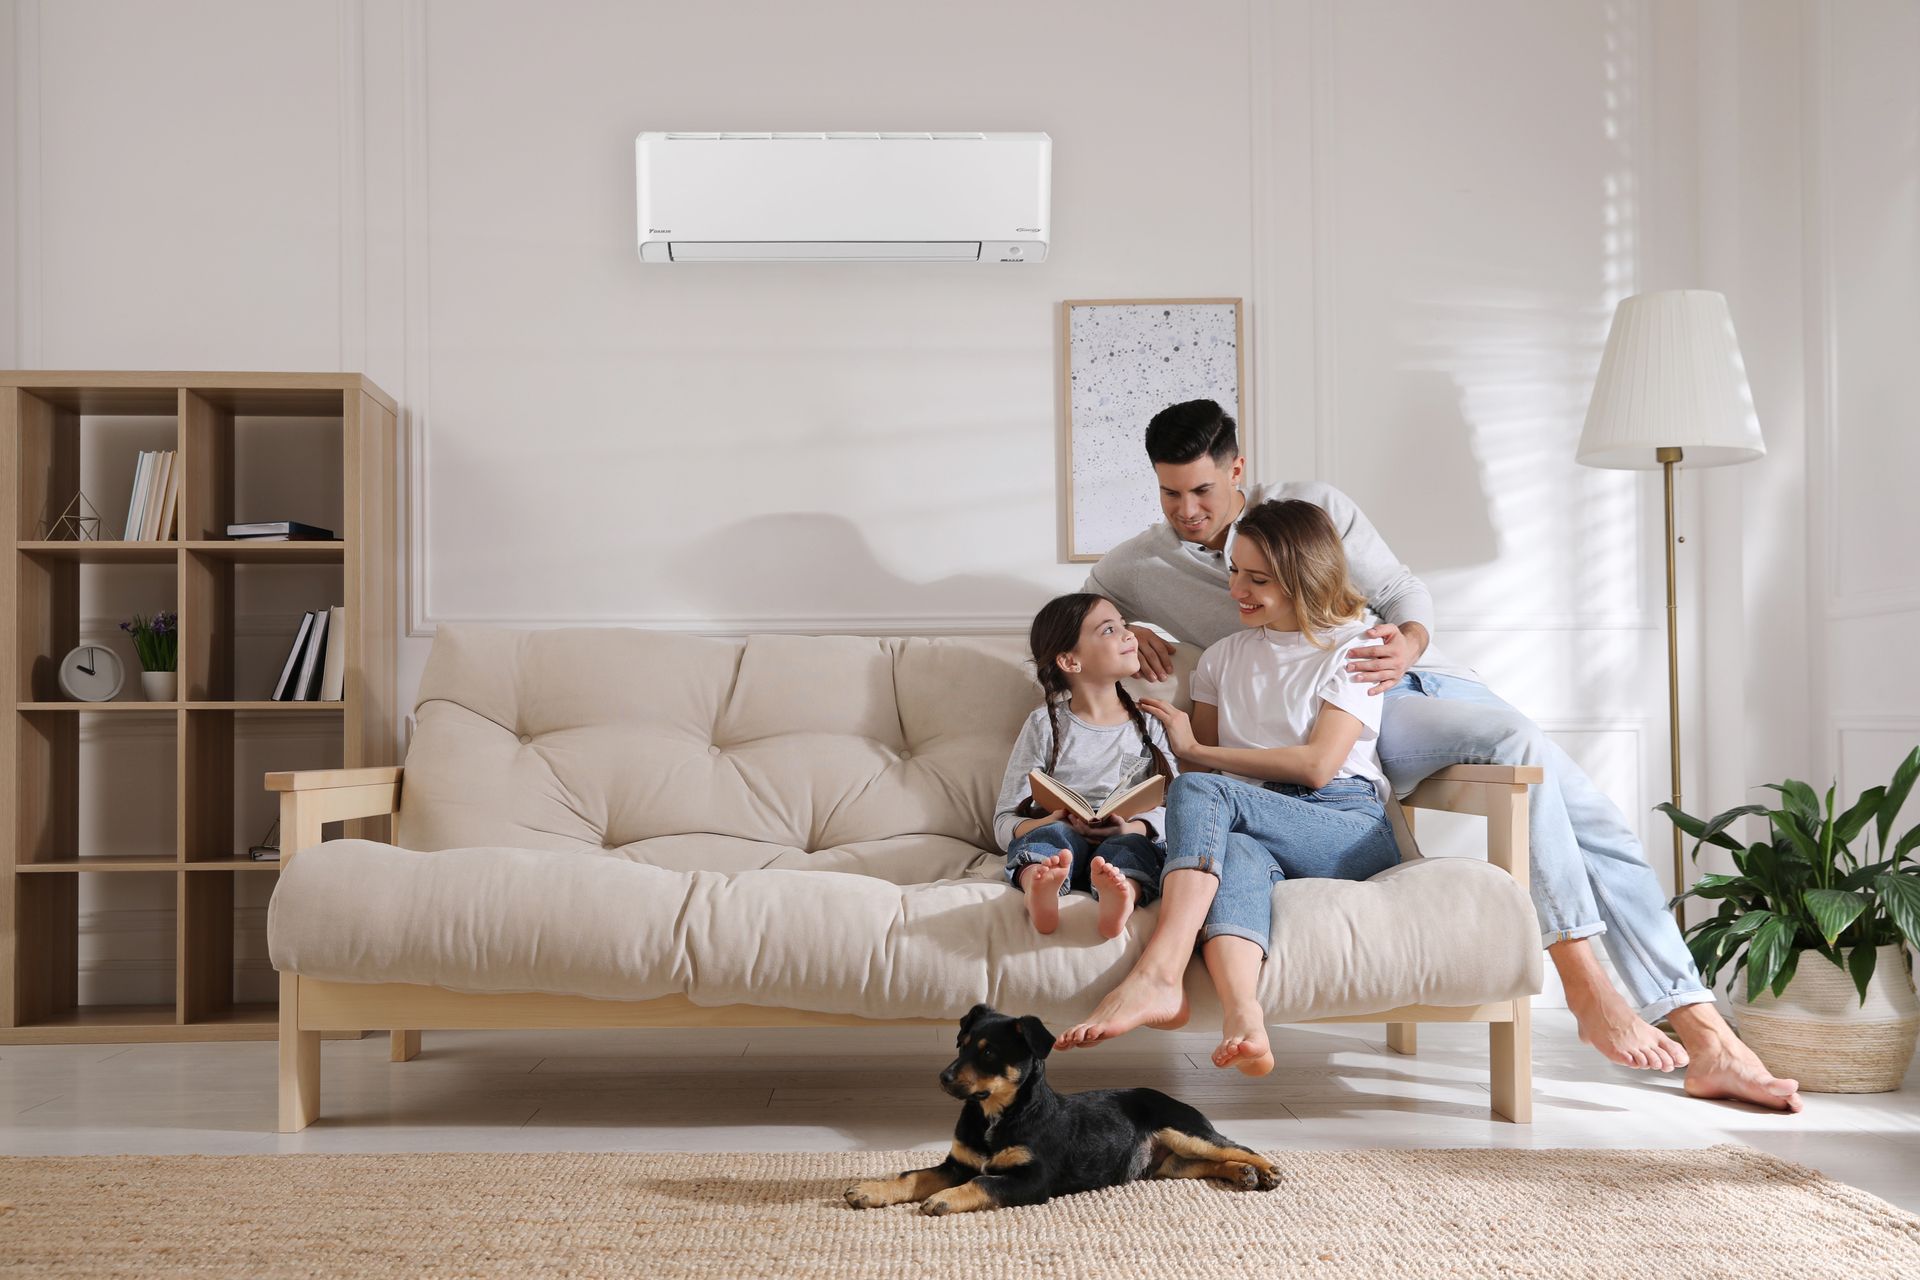 Daikin heat pump in a lounge with family and dog